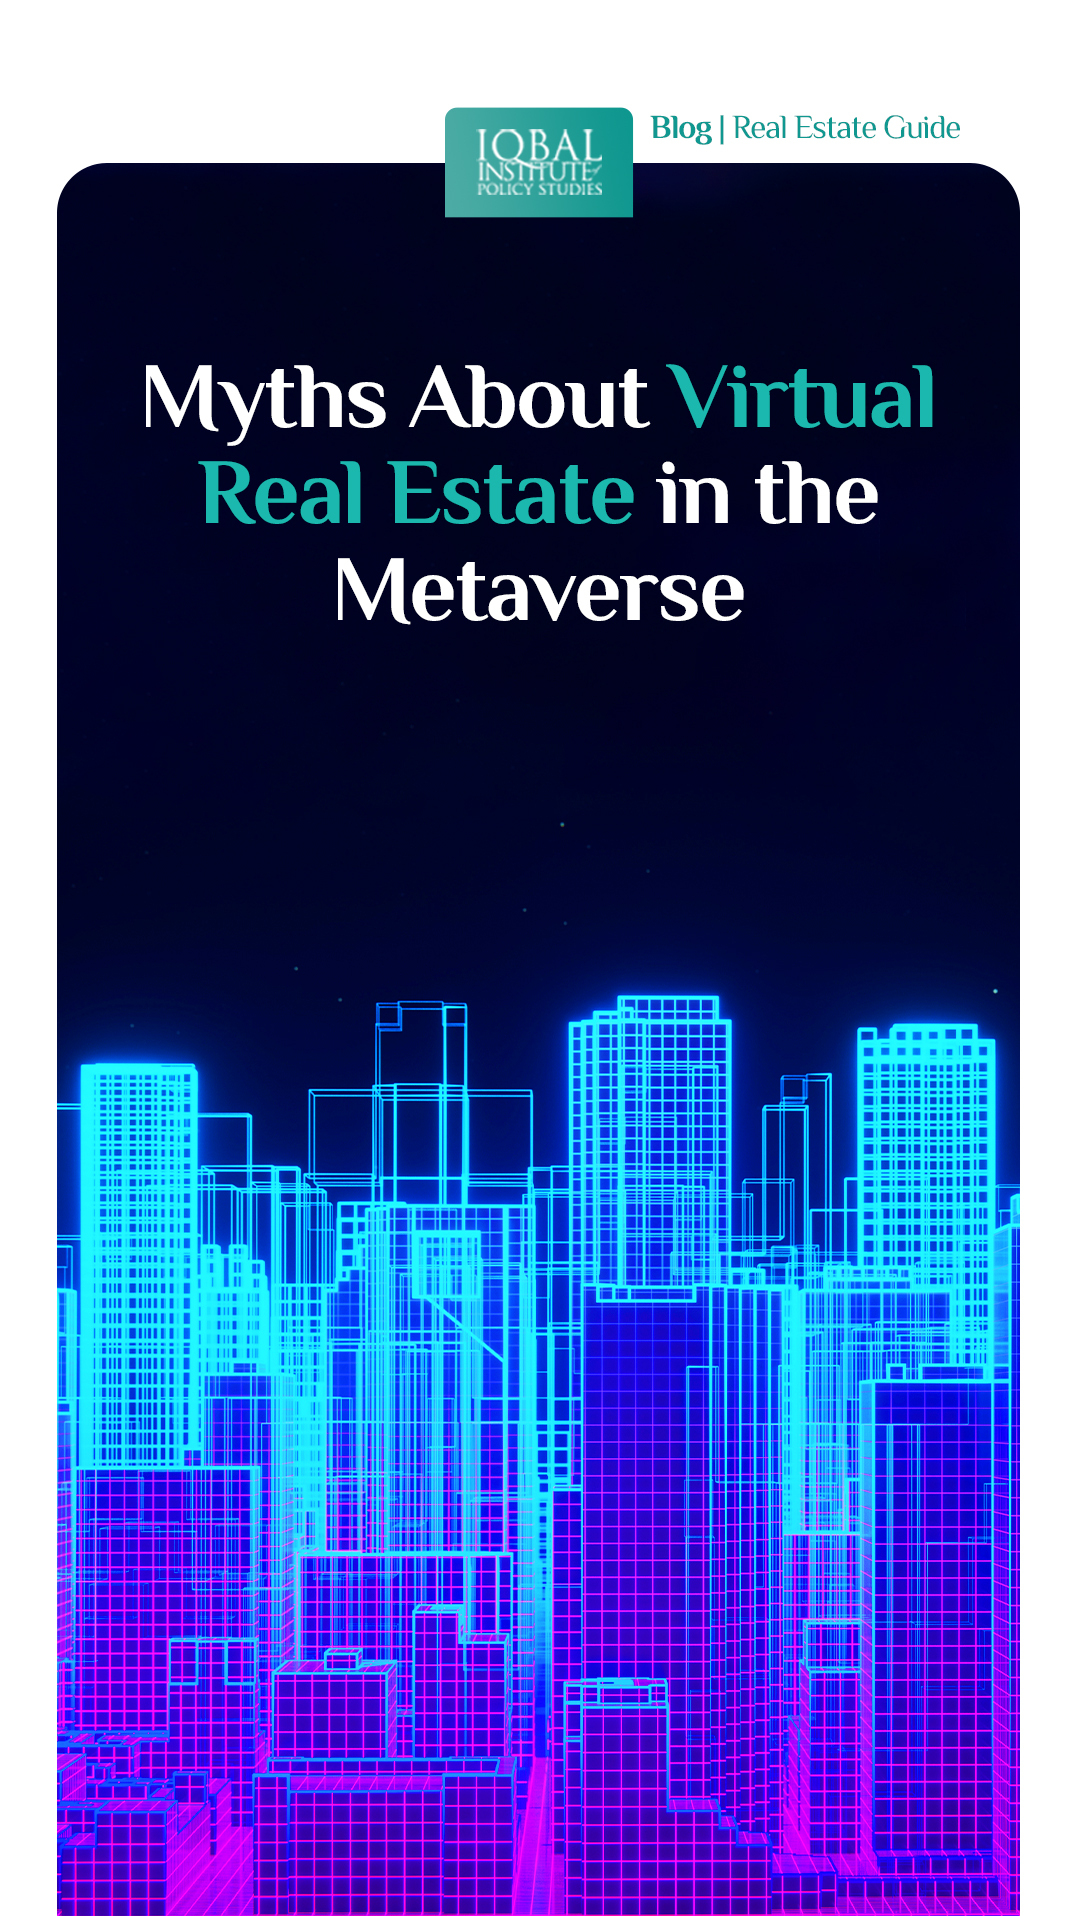 Myths about Virtual Real Estate in the Metaverse